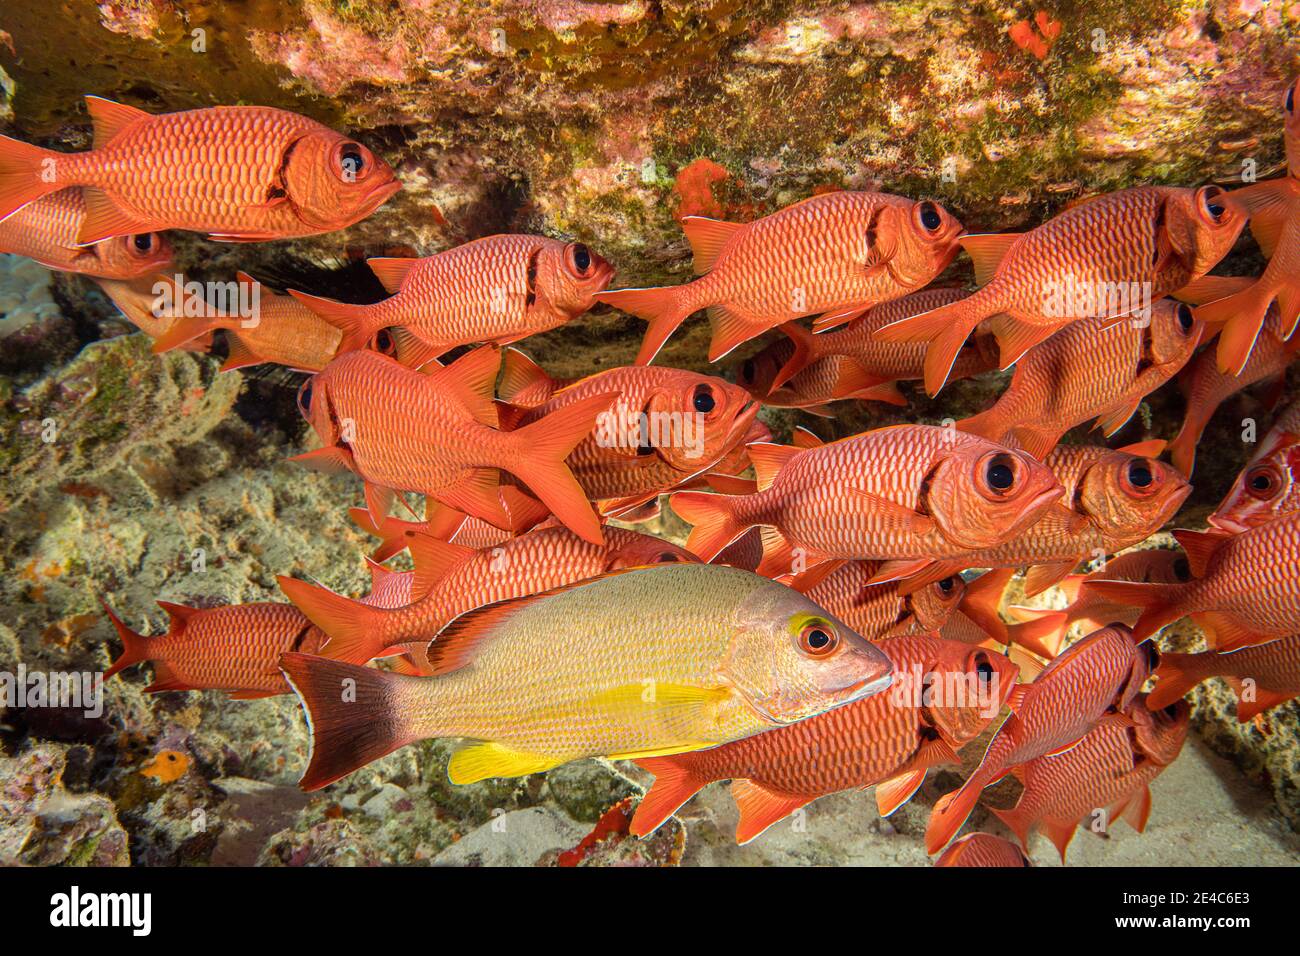 This blacktail snapper, Lutjanus fulvus, stands out from a school of shoulderbar soldierfish, Myripristis kuntee. Hawaii. The blacktail snapper is one Stock Photo